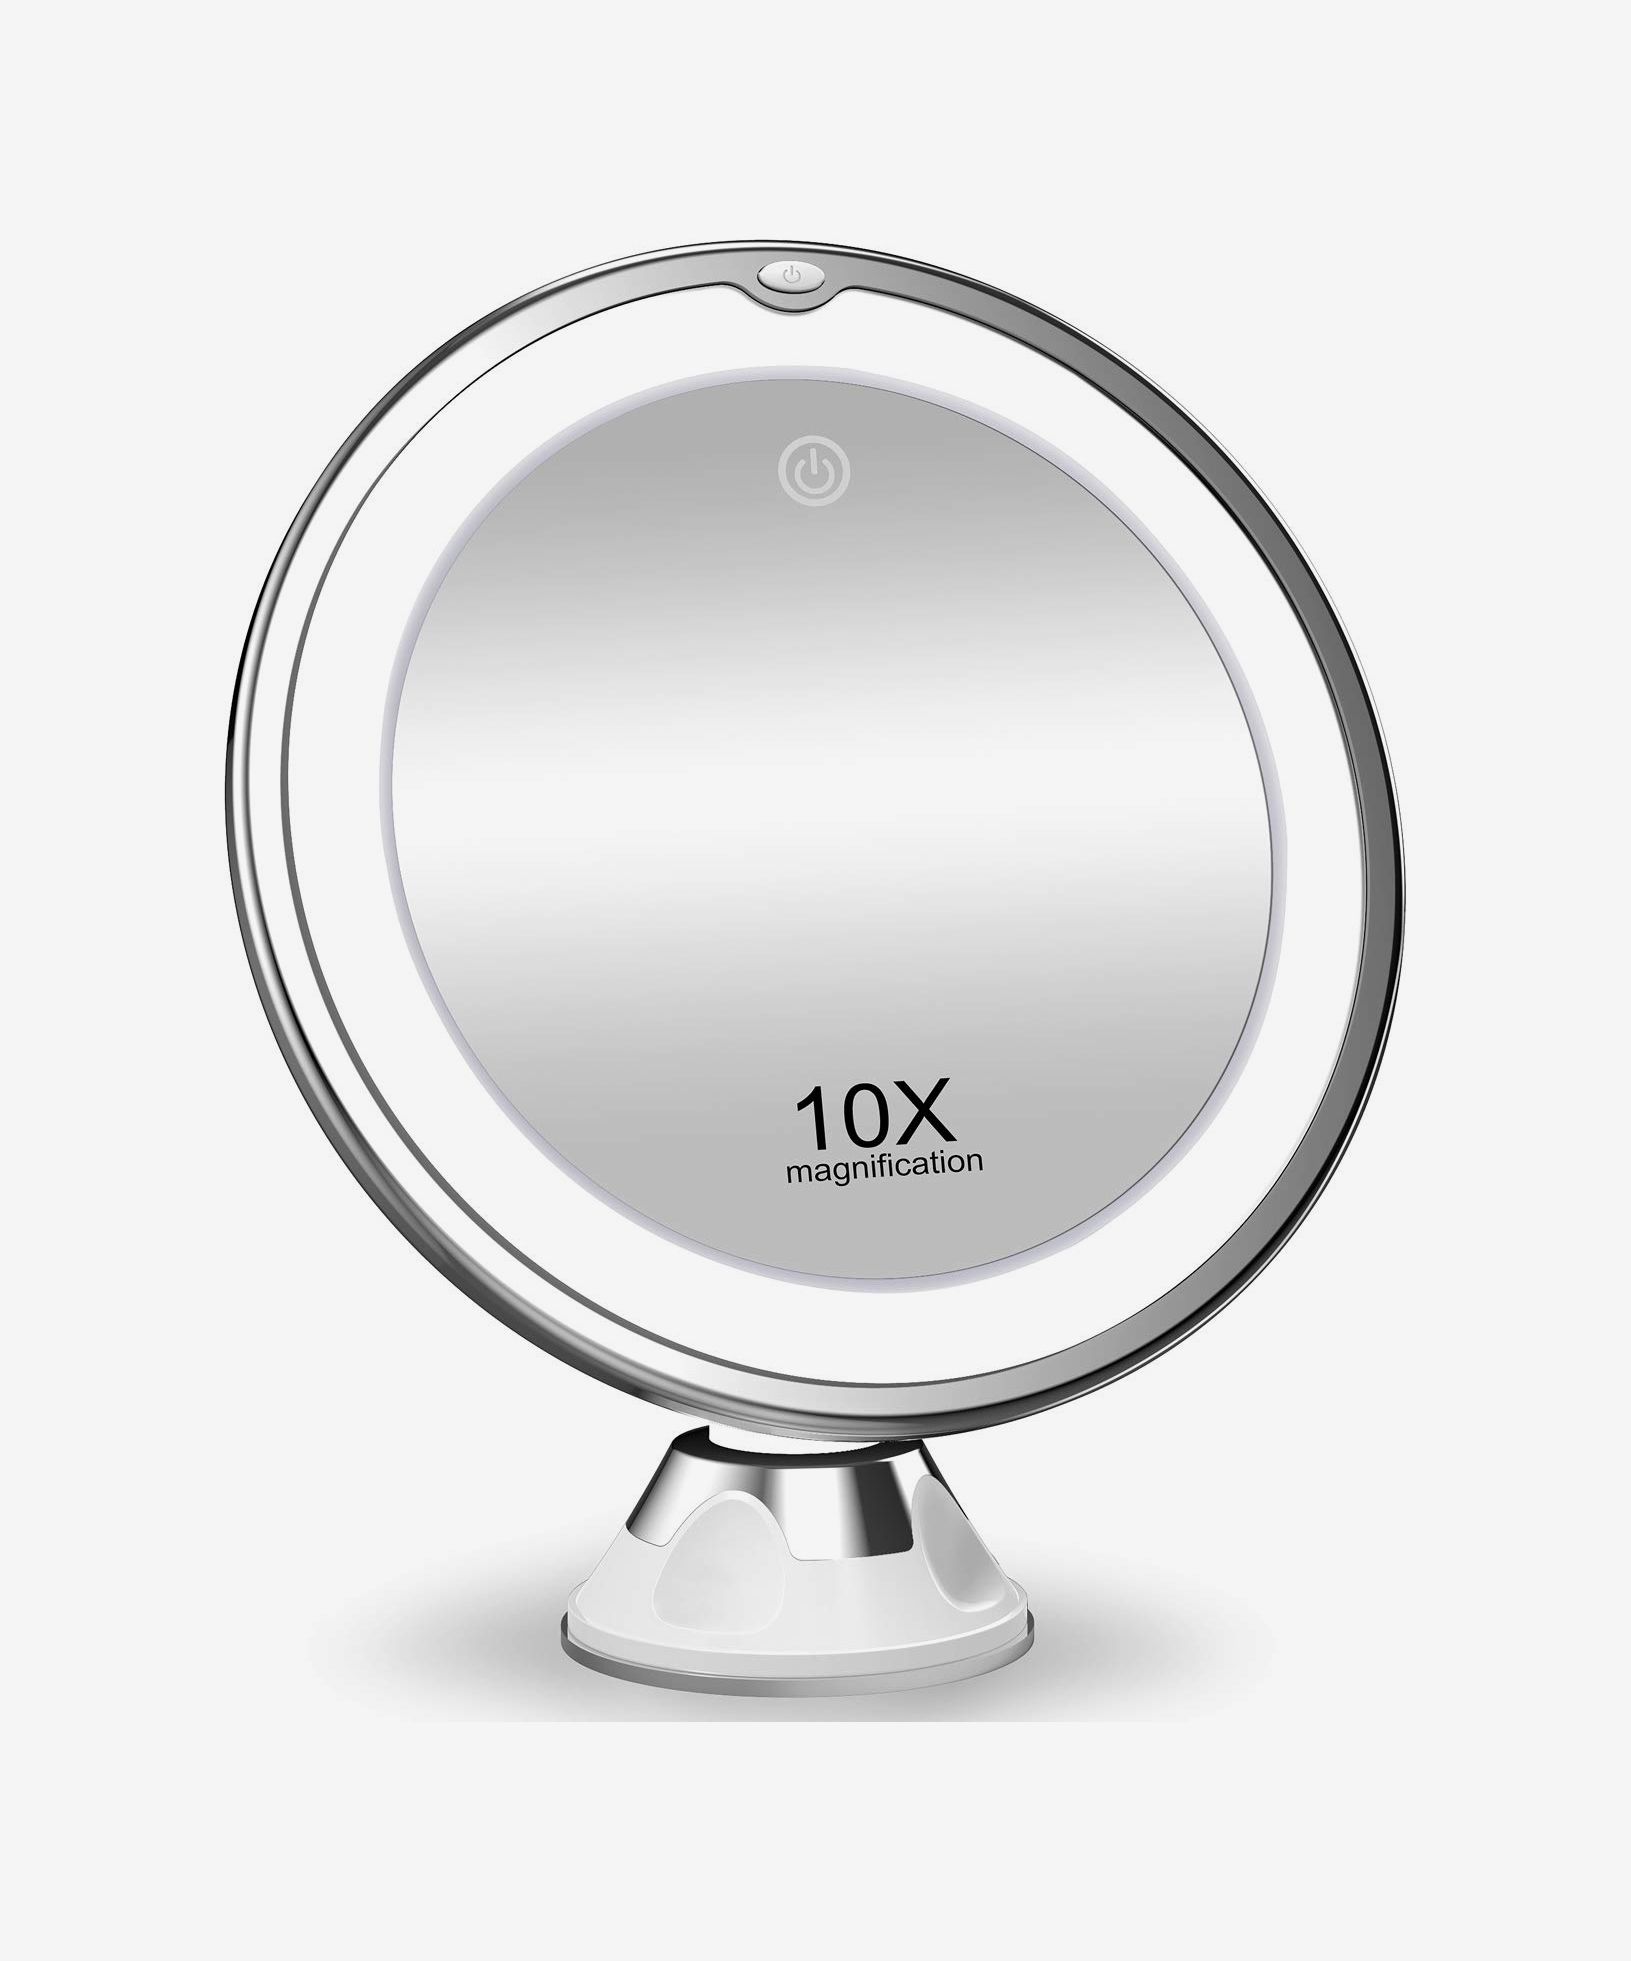 14 Best Lighted Makeup Mirrors 2021, Best Lighted Magnifying Makeup Mirror 2021